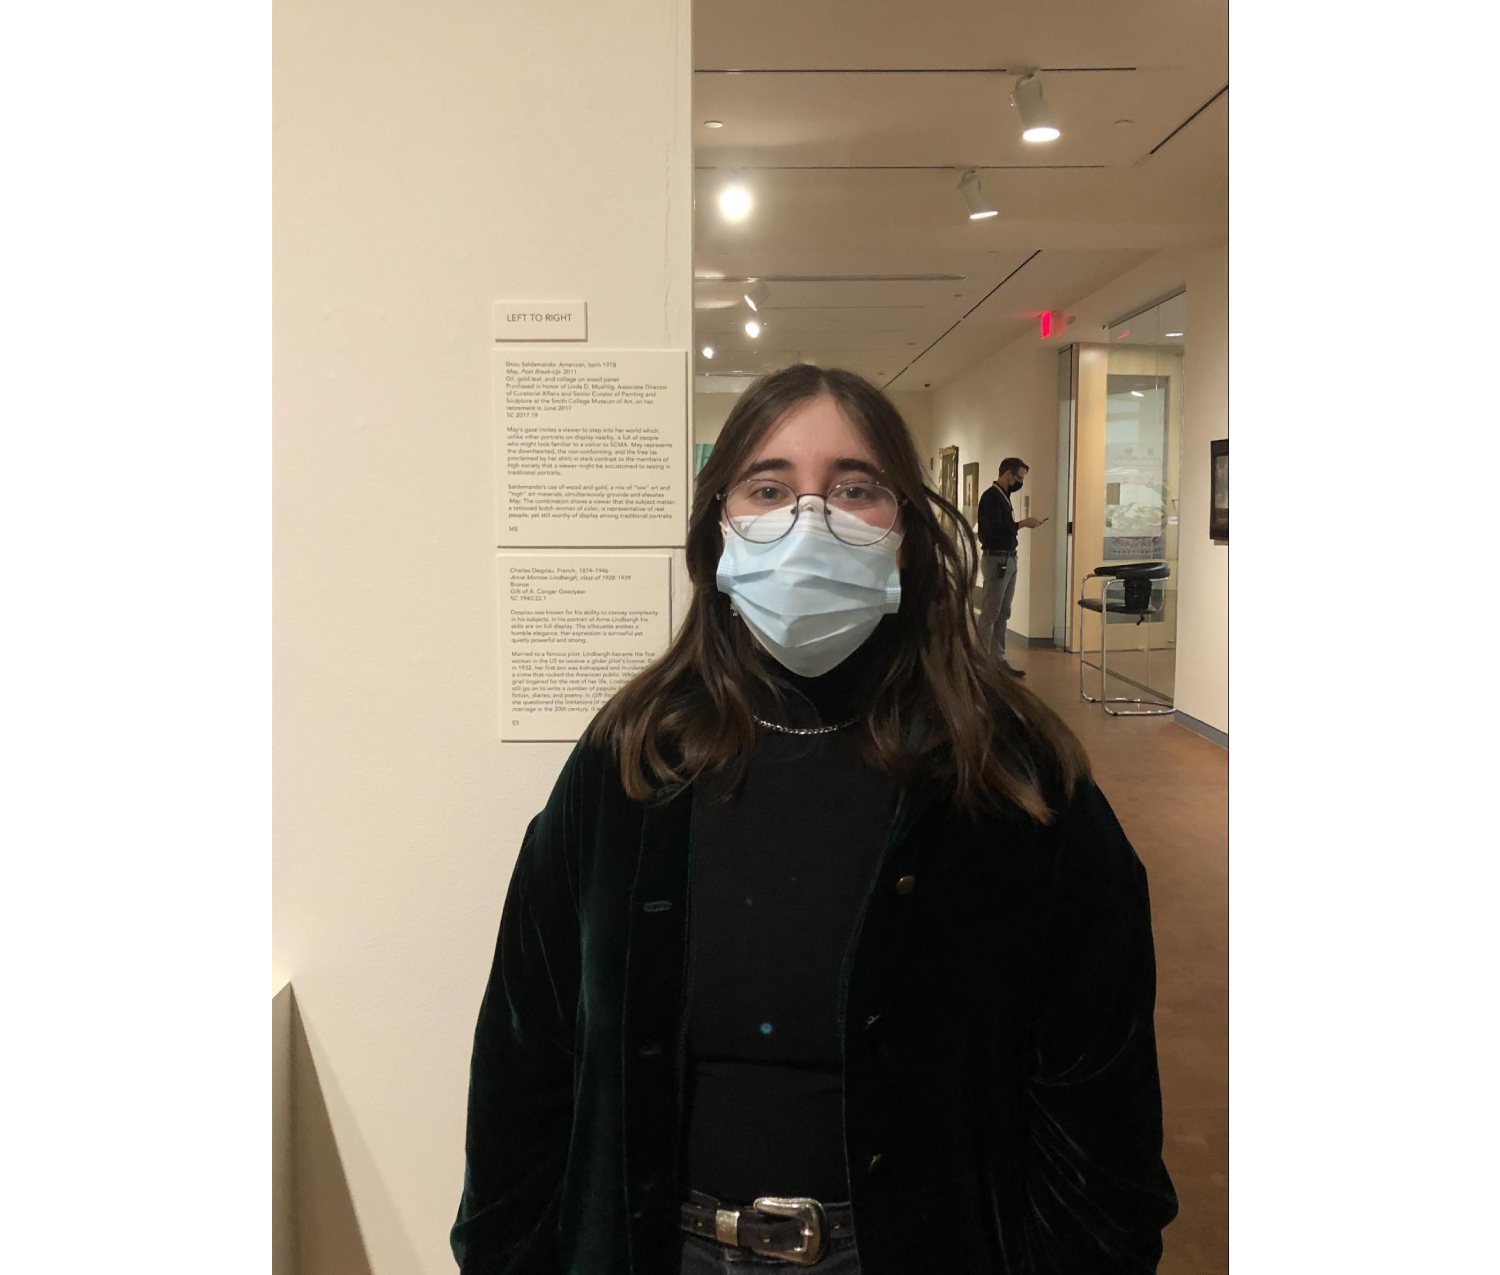 Masked student standing in front of an artwork label in an SCMA gallery.